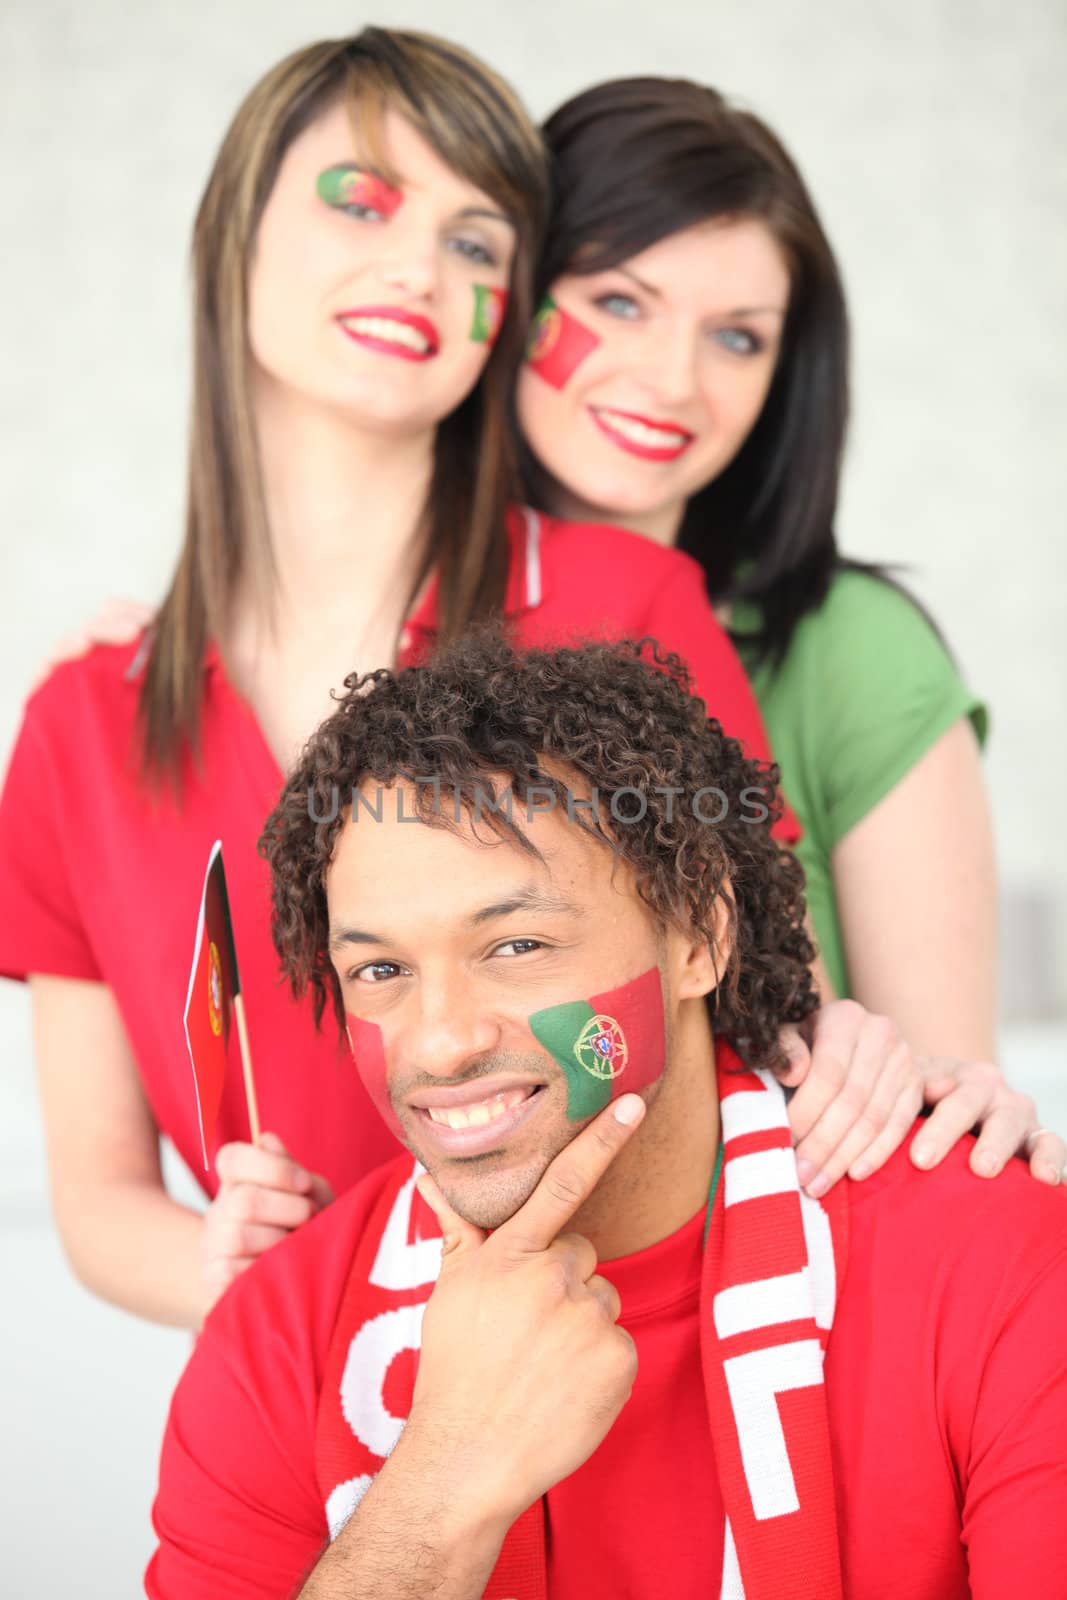 Three Portuguese football supporters